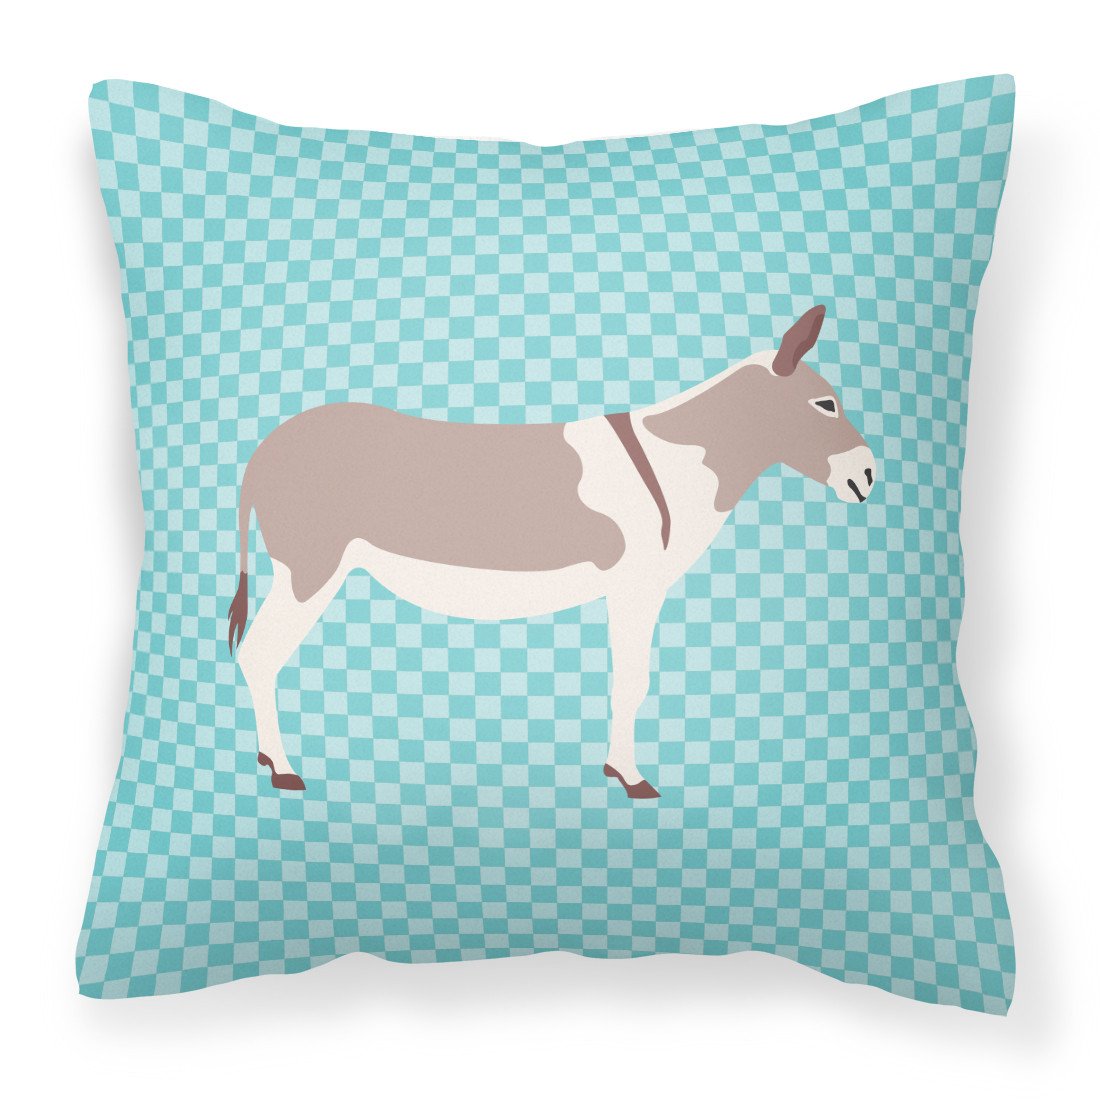 Australian Teamster Donkey Blue Check Fabric Decorative Pillow BB8020PW1818 by Caroline's Treasures